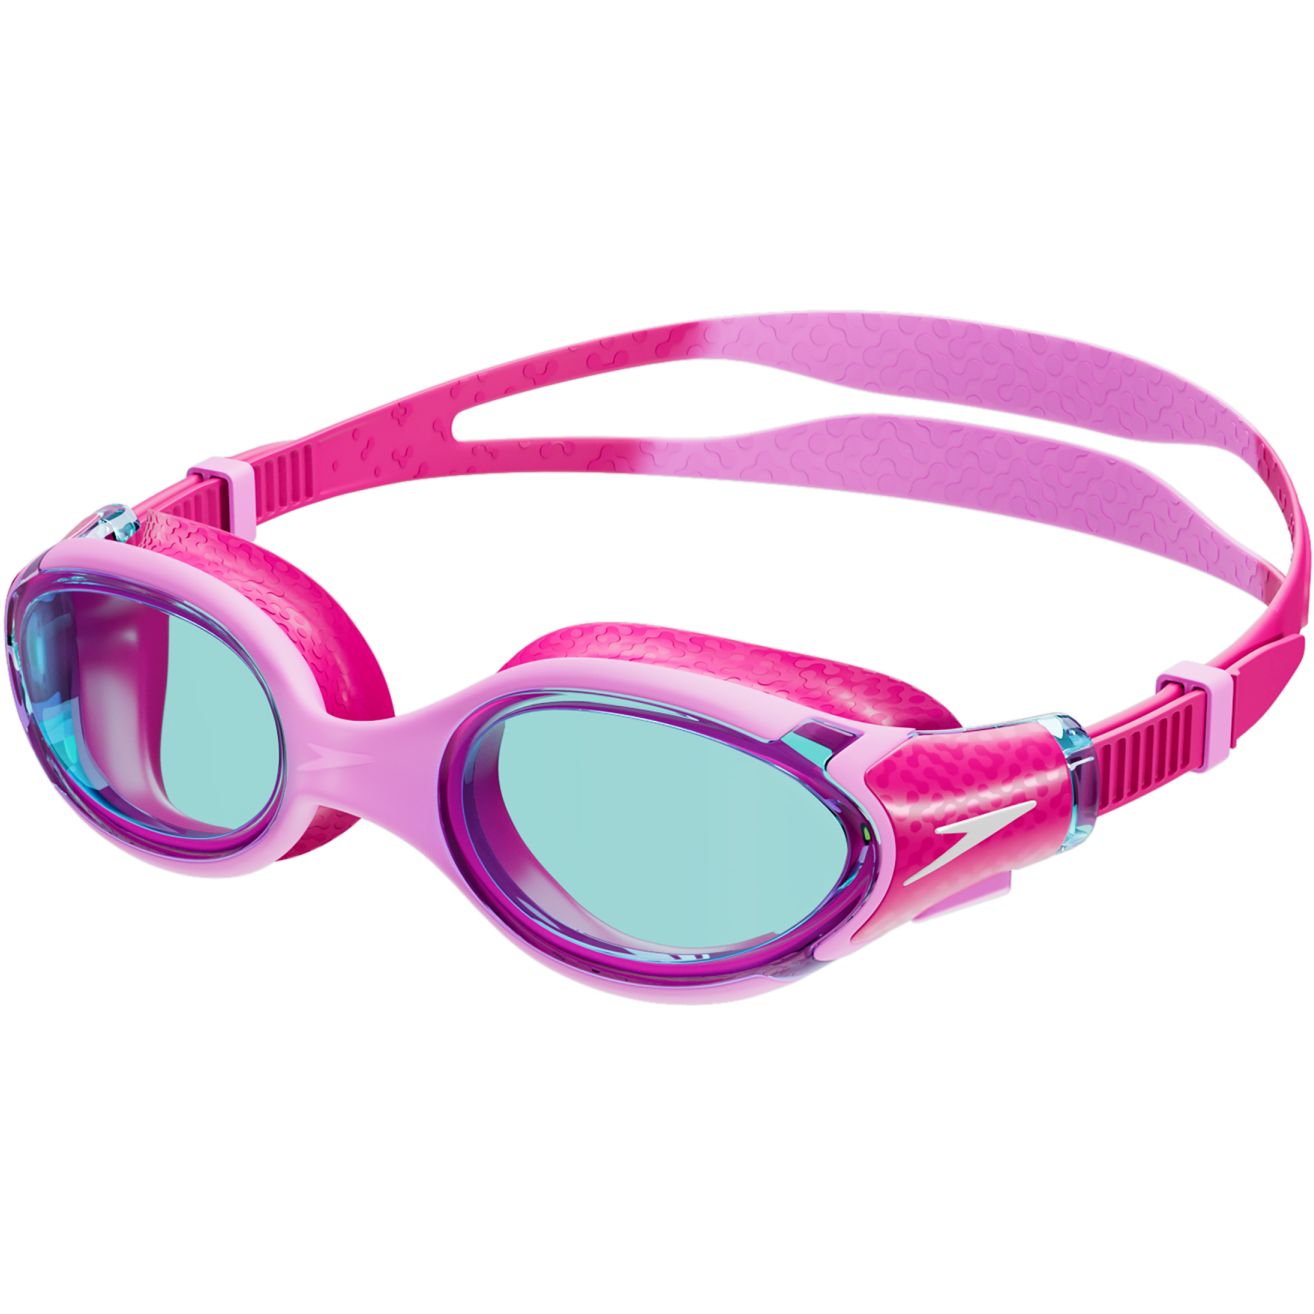 Picture of Speedo Biofuse 2.0 Junior Flamingo Pink/Electric Pink/Blue Swimming Goggle